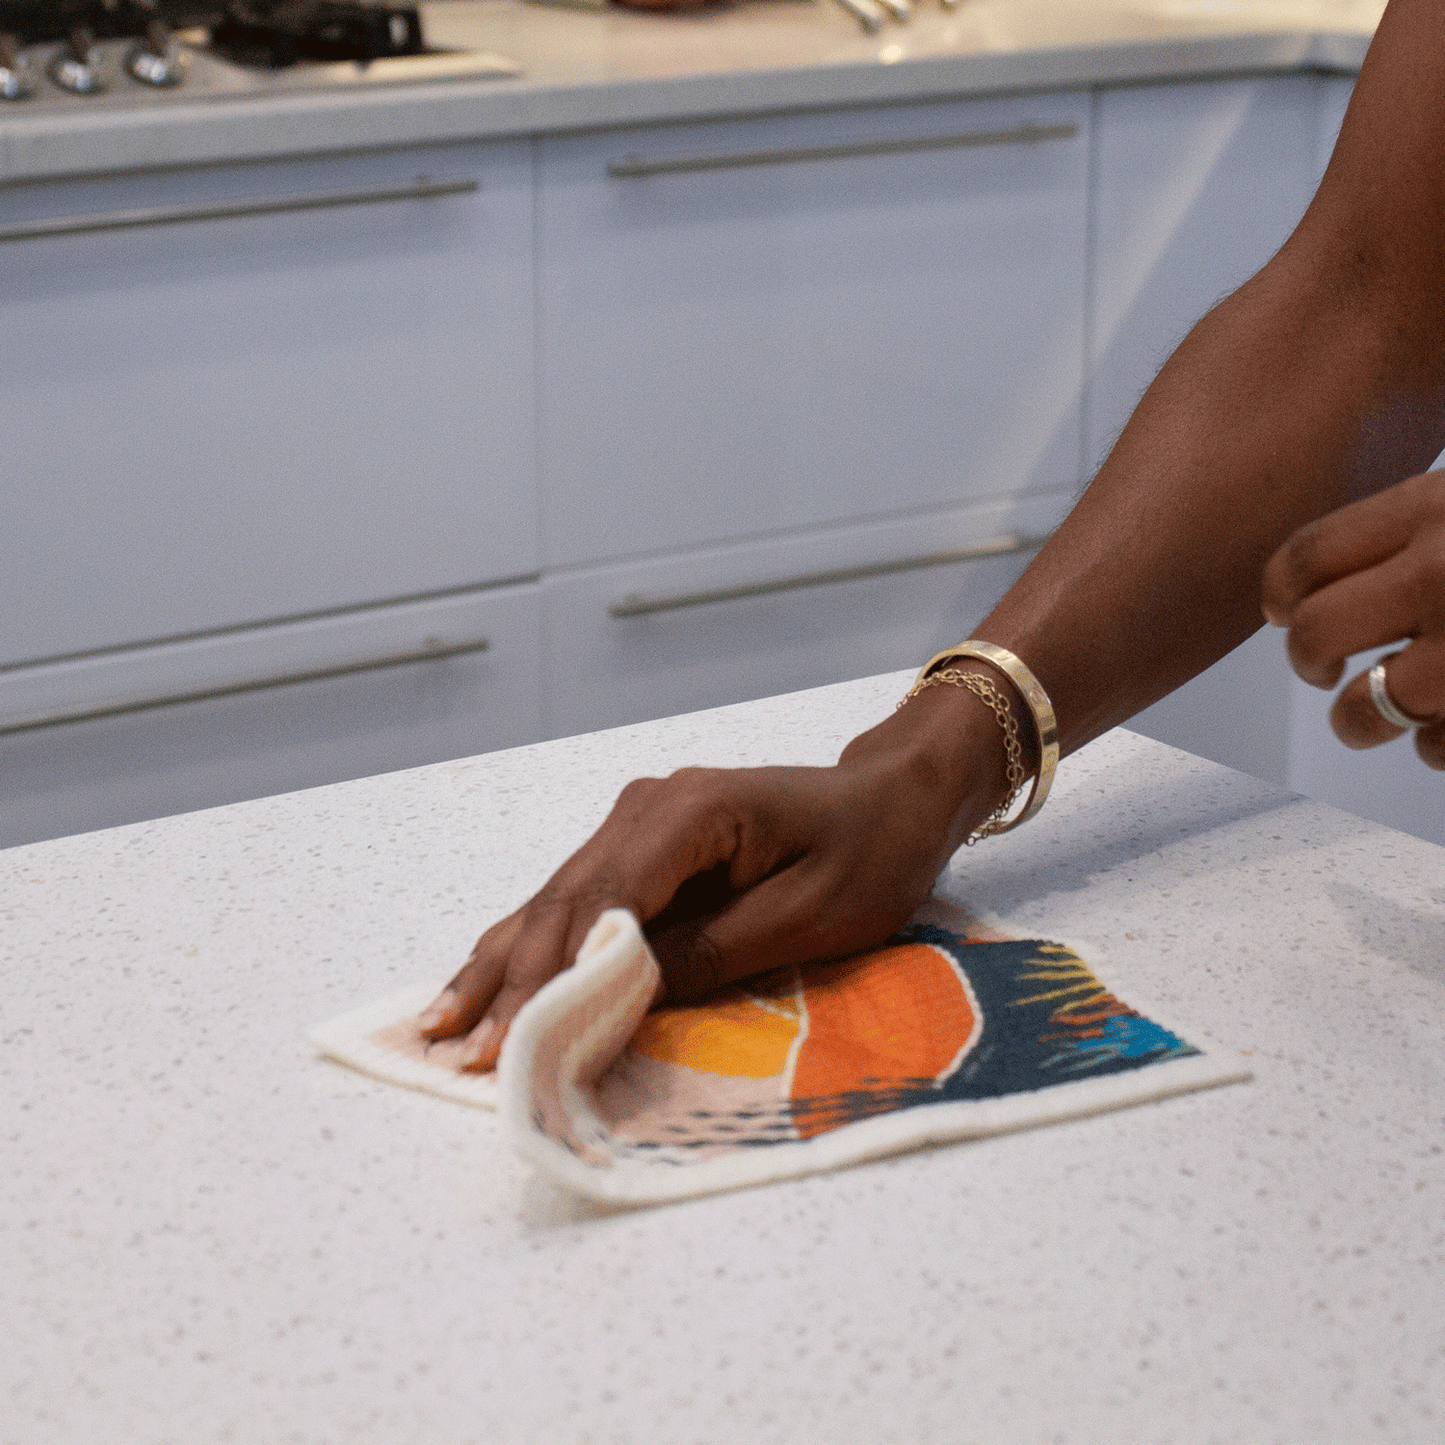 A hand uses a super sponge cloth with a desert scene to wipe a kitchen counter.